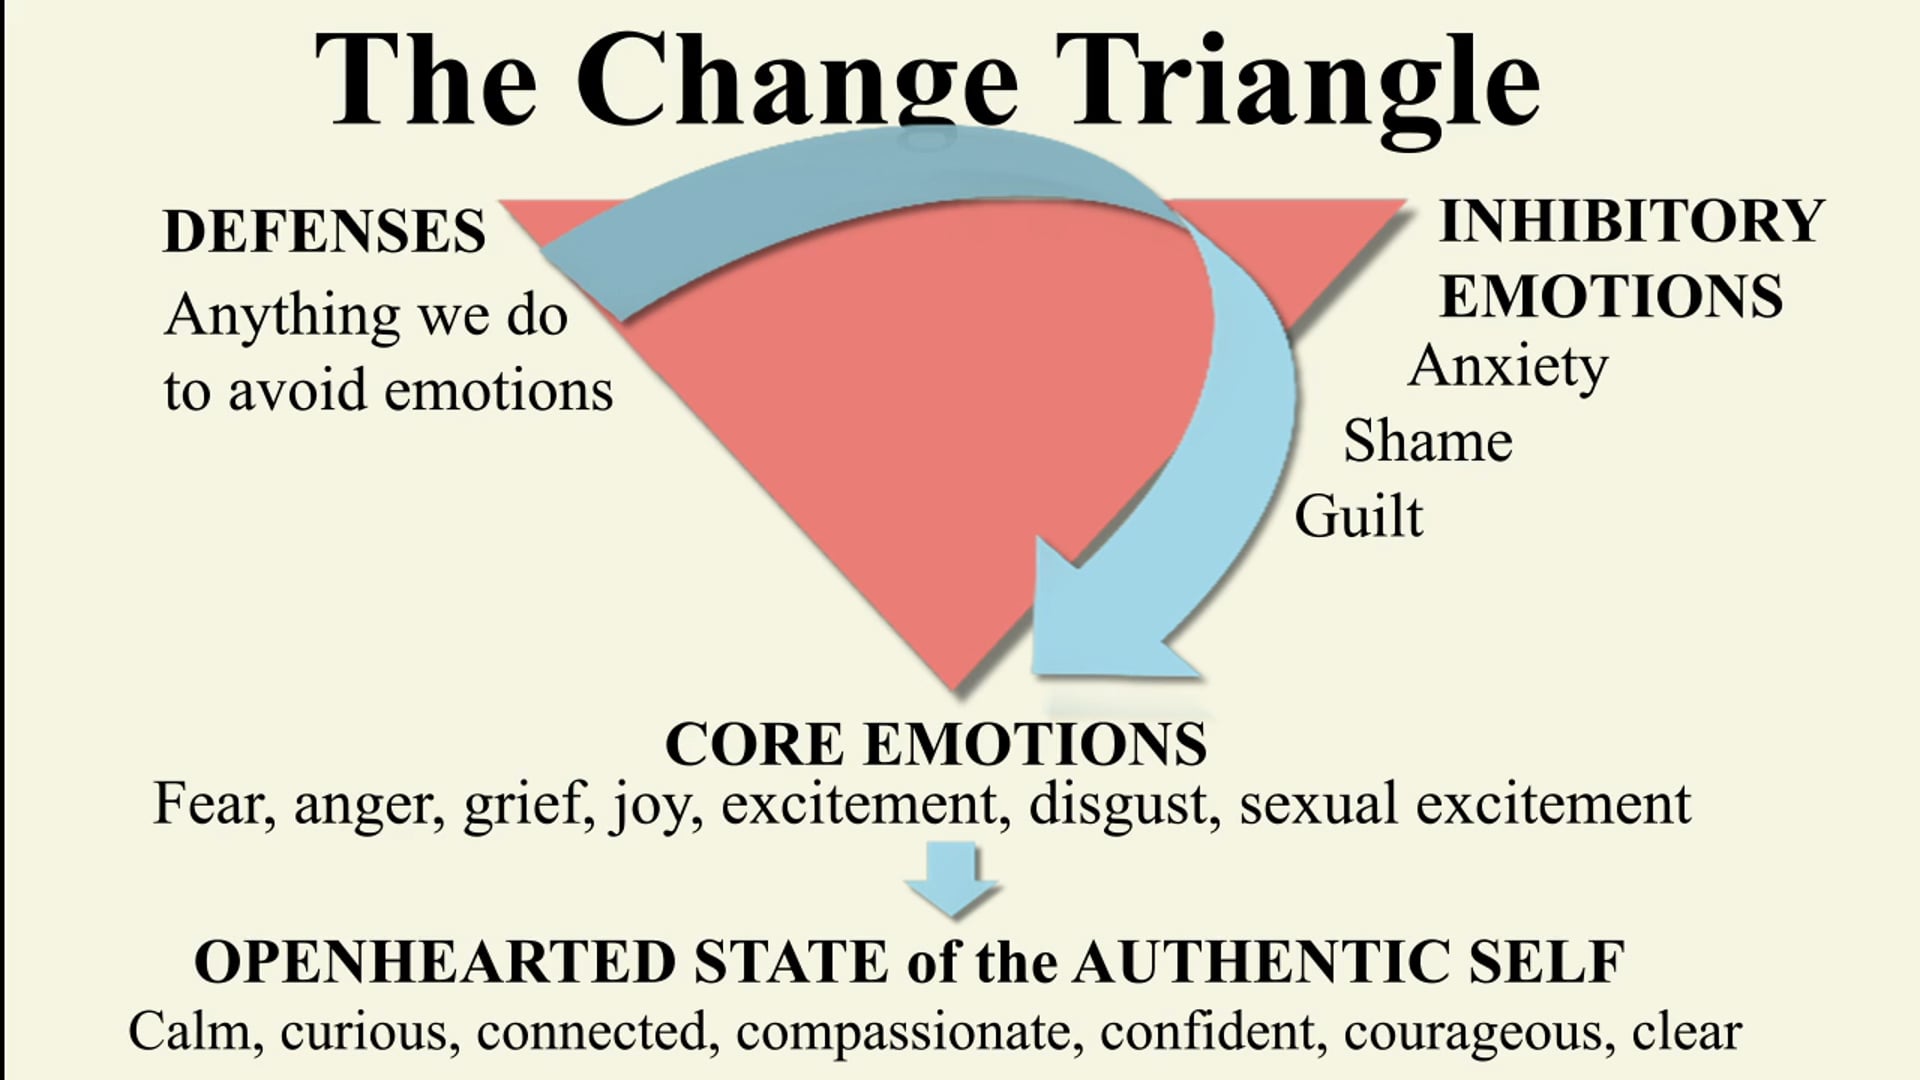 AEDP Transformance and the Change Triangle